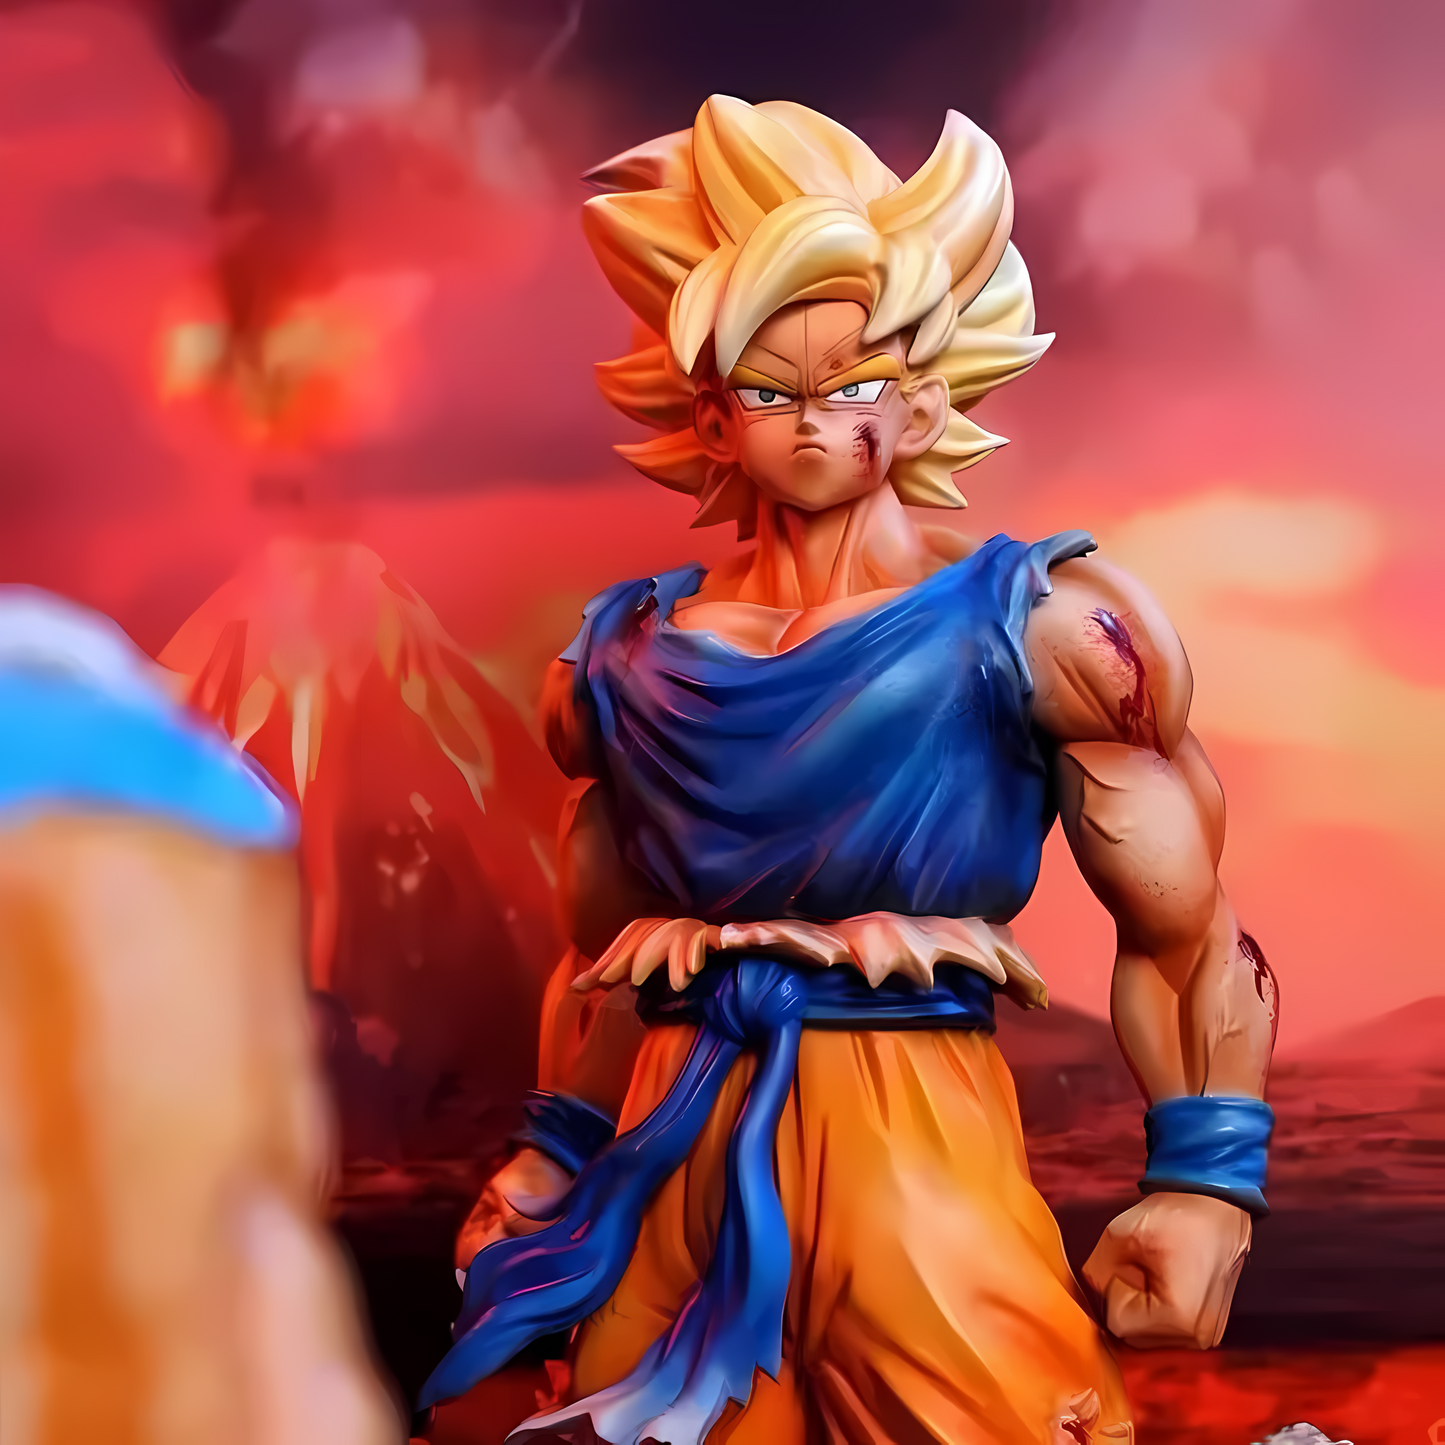 Detailed shot of Super Saiyan Goku from the Dragon Ball figure set, showing intense focus and battle damage, with a fiery, tempestuous backdrop.